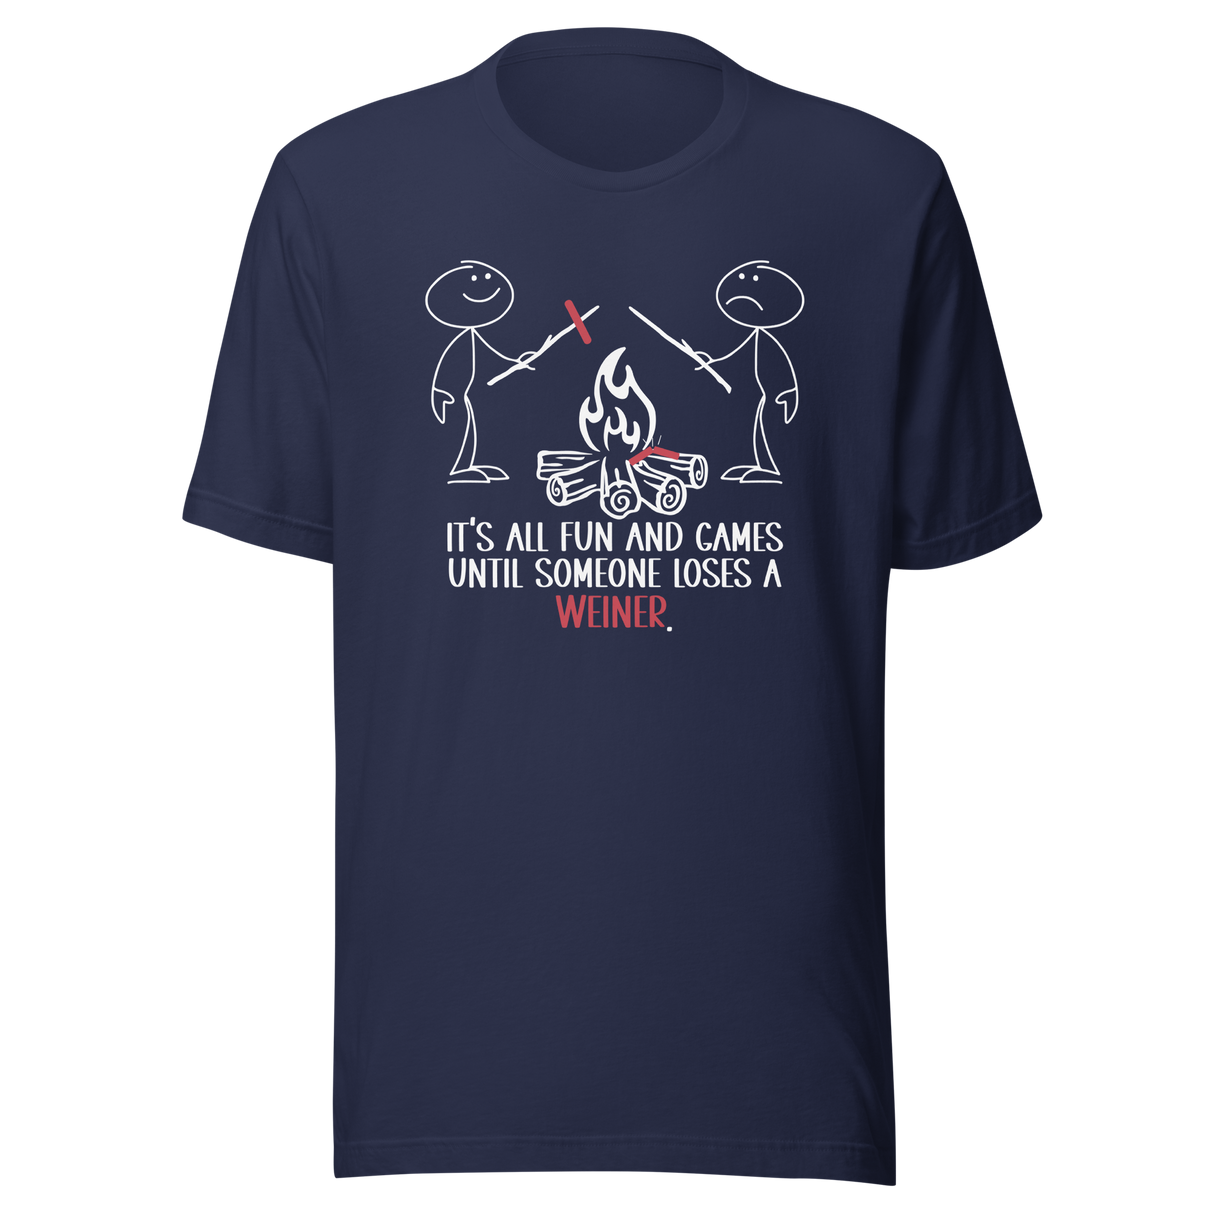 its-all-fun-and-games-until-someone-loses-a-weiner-funny-tee-funny-t-shirt-games-tee-weiner-t-shirt-humor-tee#color_navy